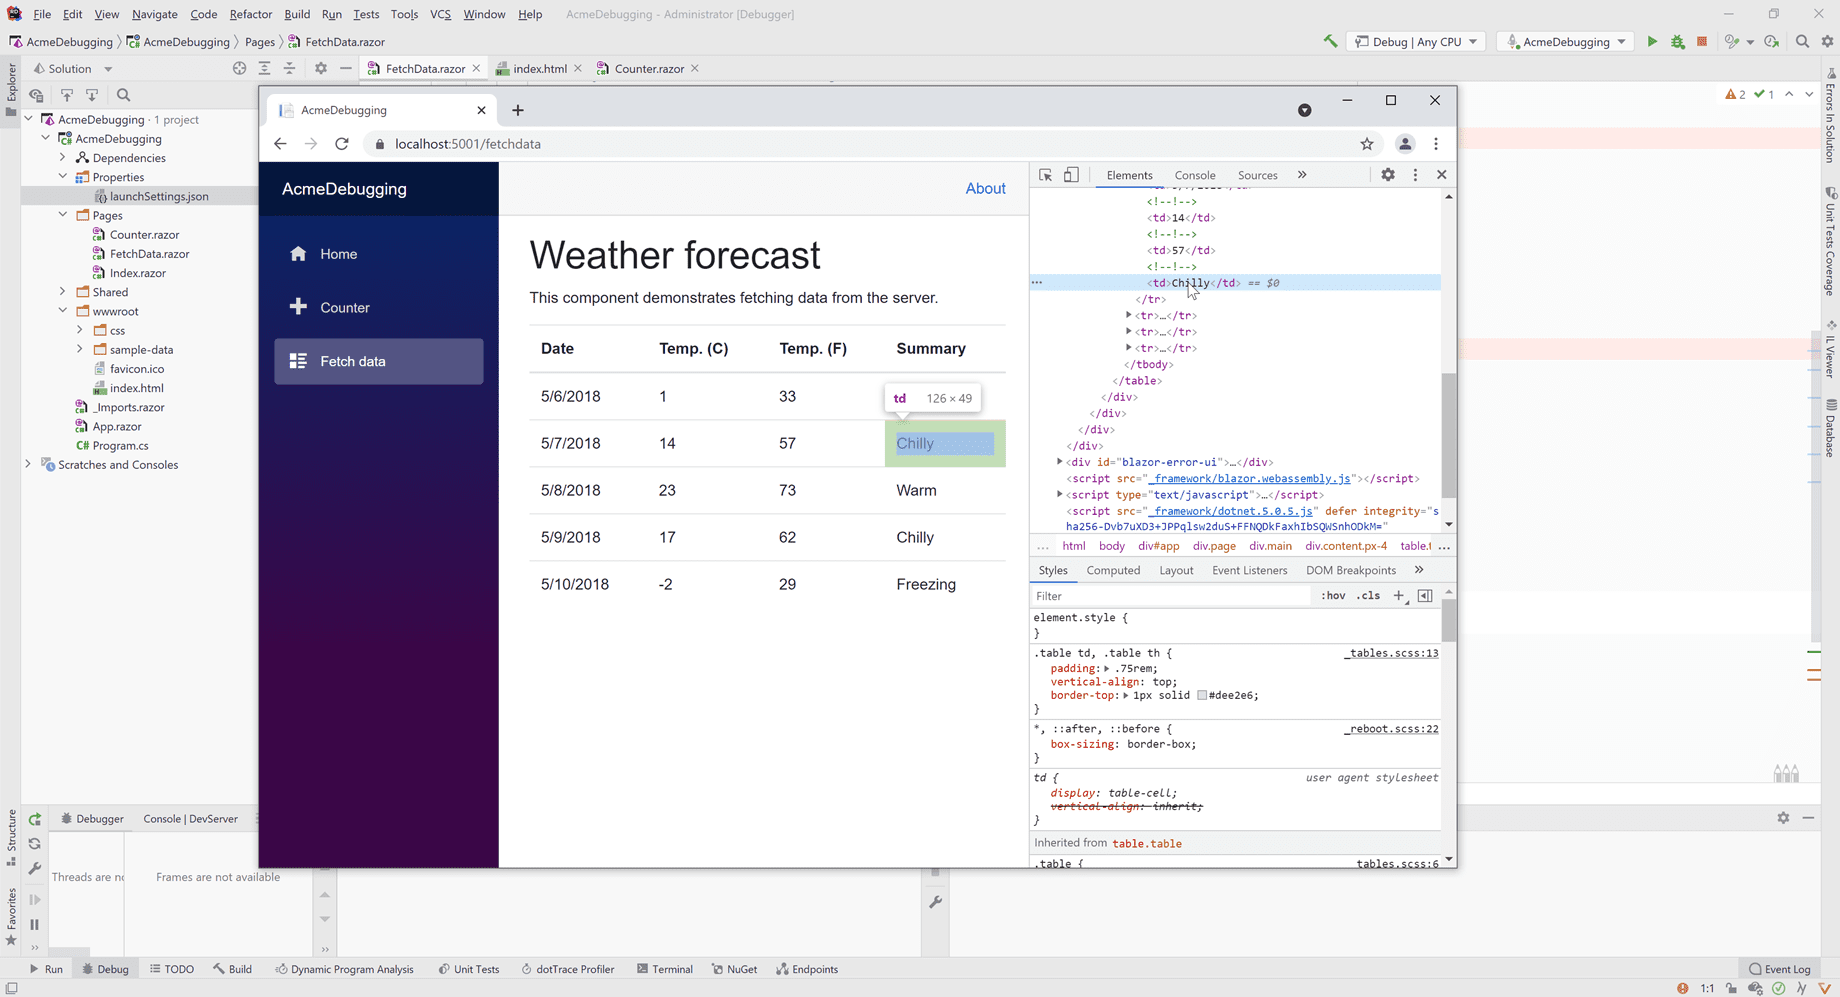 Blazor WASM tools works with the browser